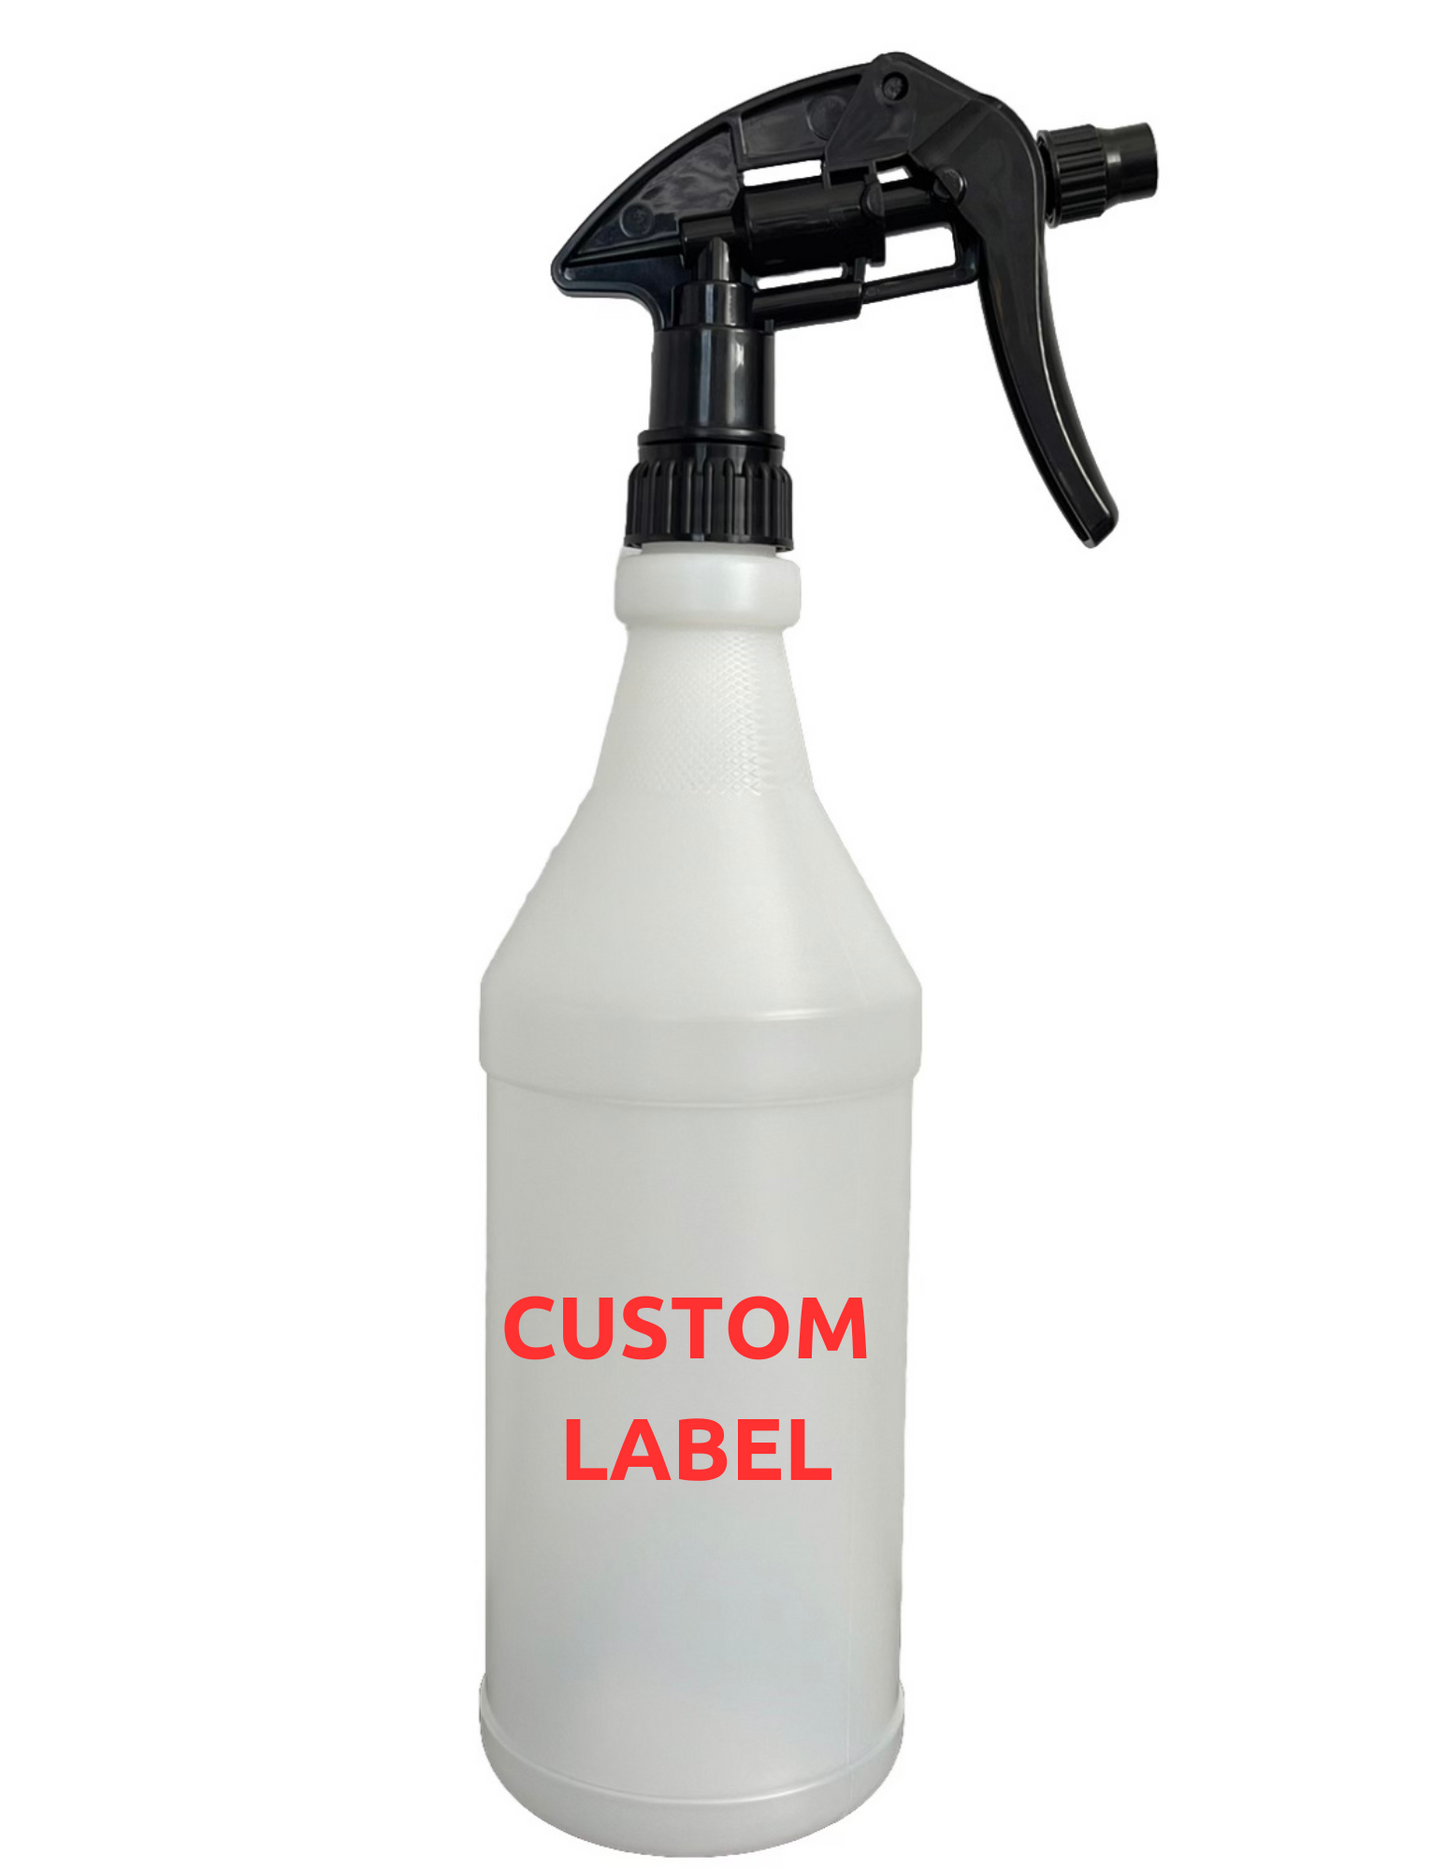 32 ounce Spray Bottle - No Trigger or Label, 8 cases = 672 units